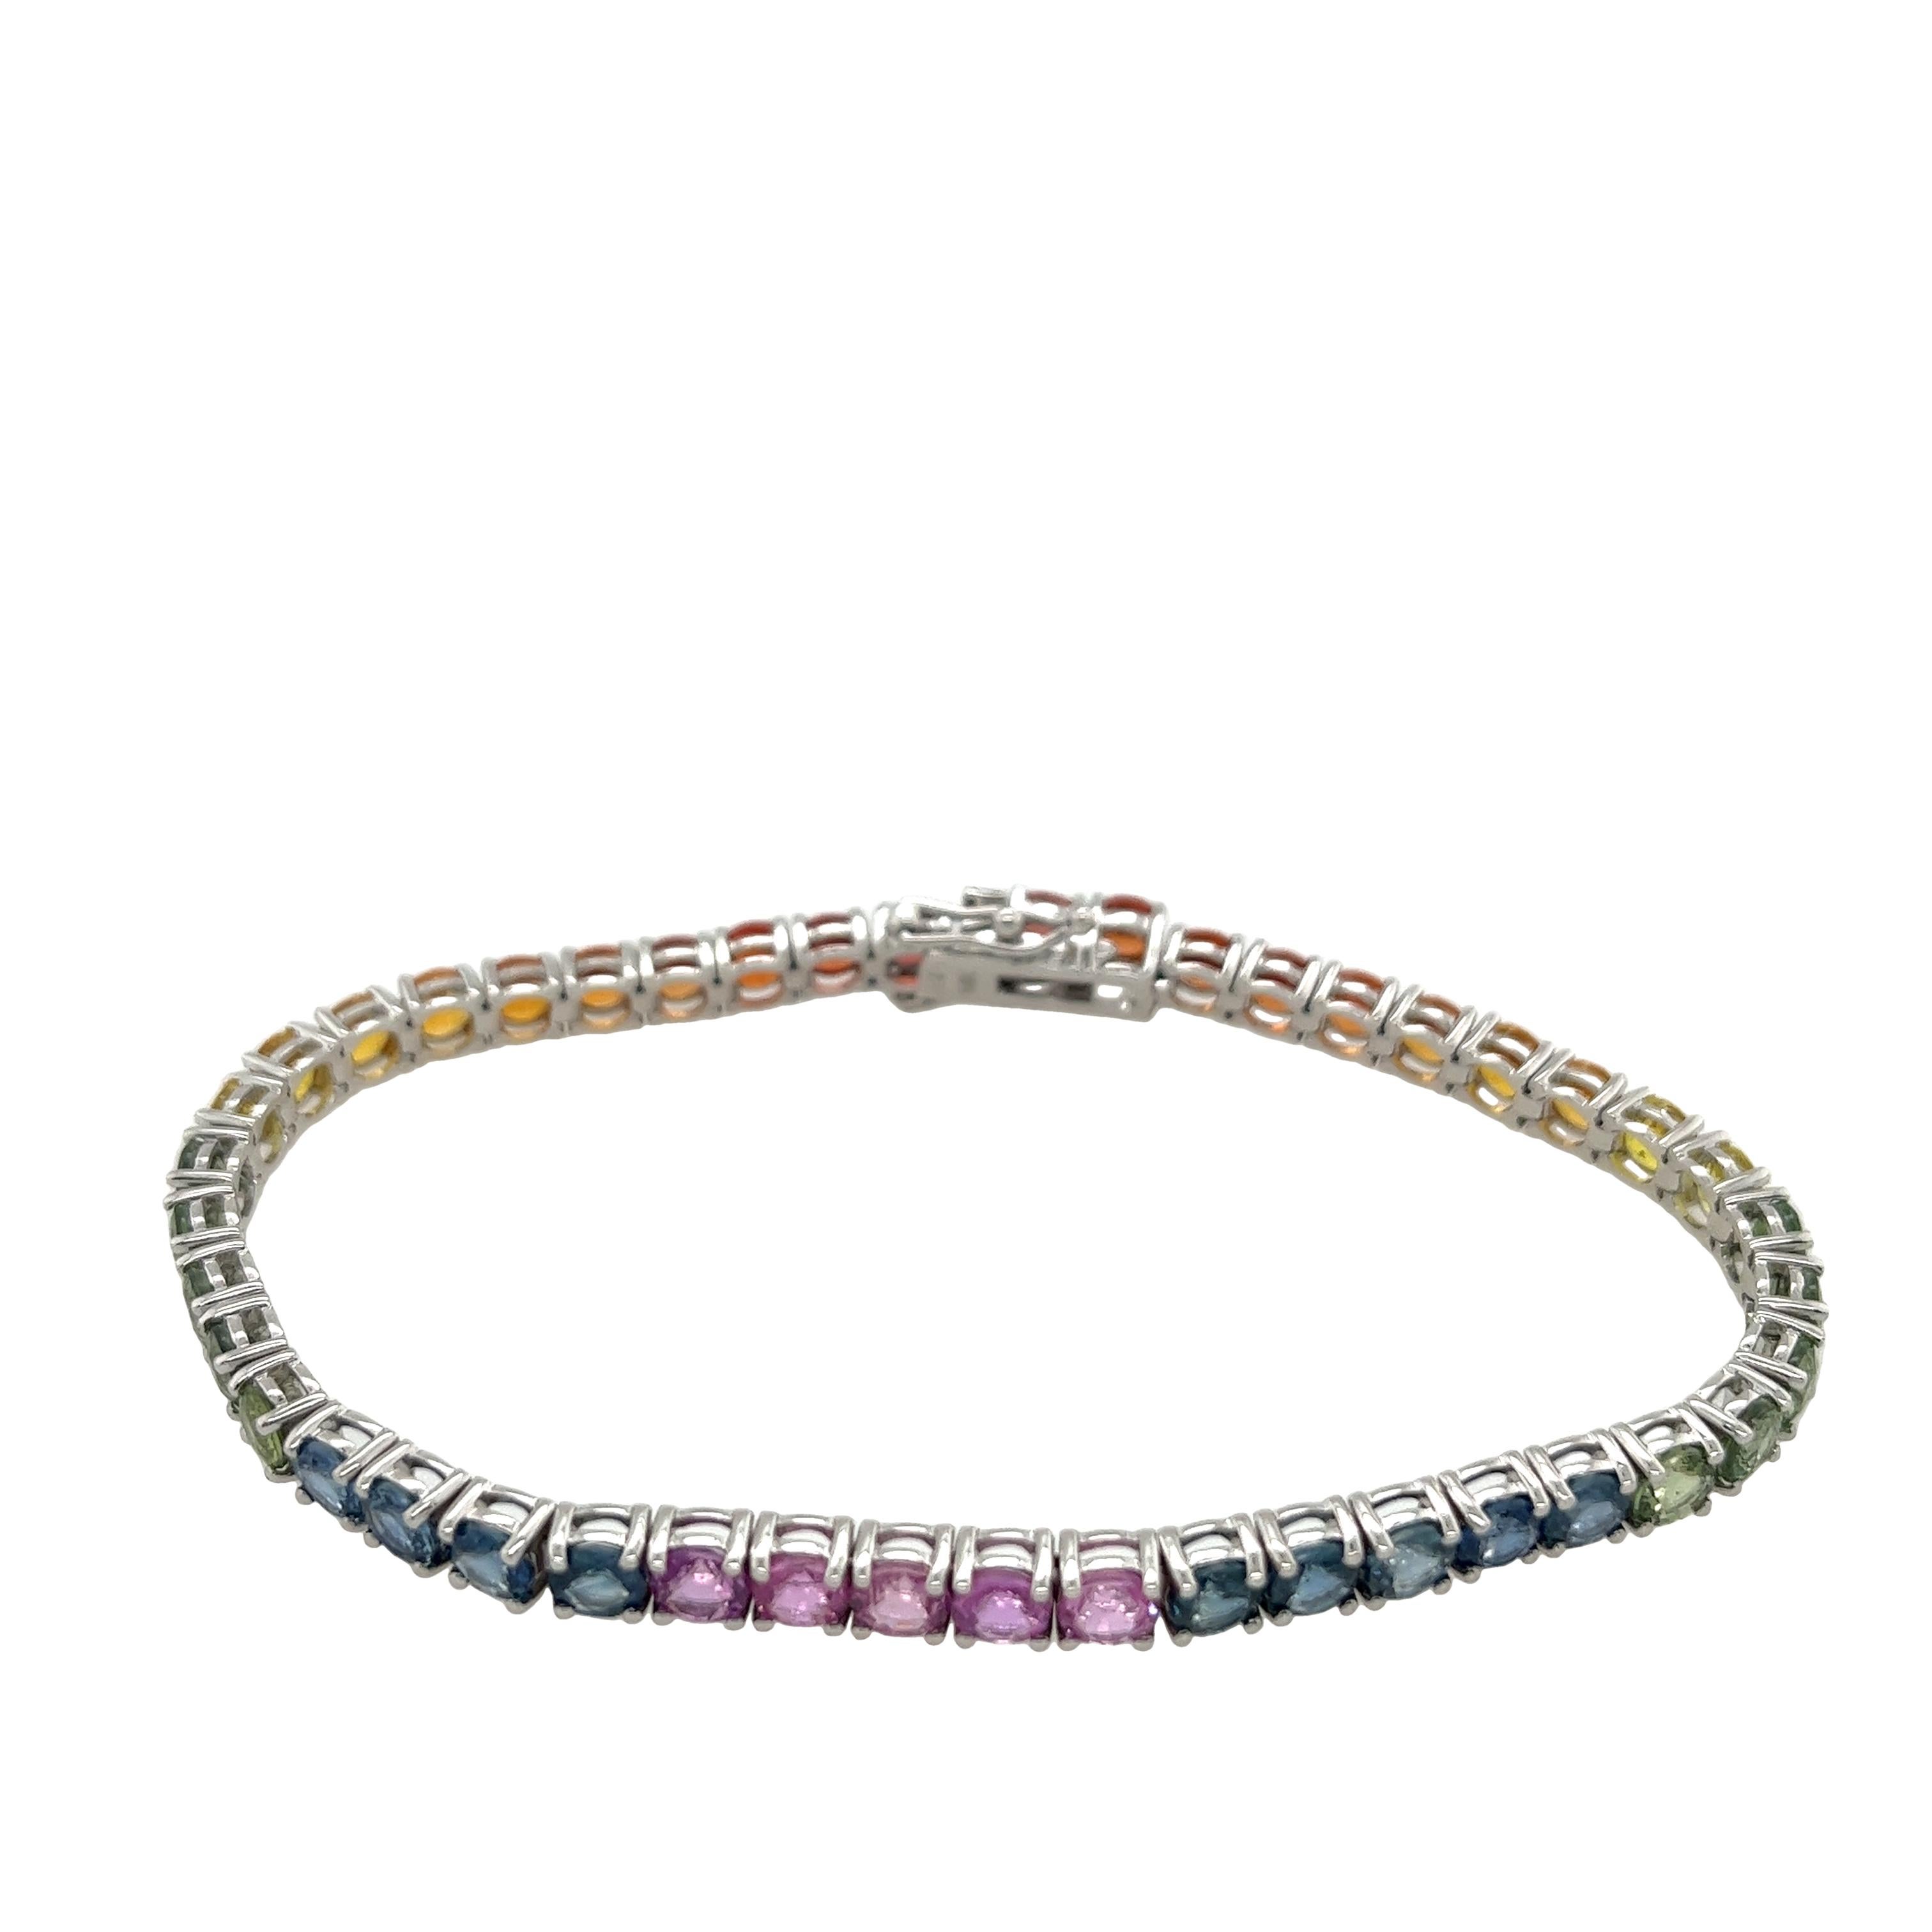 Indulge in timeless elegance with our exquisite 14ct White Gold Natural Sapphires Rainbow Tennis Bracelet. Crafted to perfection, this bracelet features a stunning array of natural sapphires, each delicately set in lustrous white gold. The spectrum